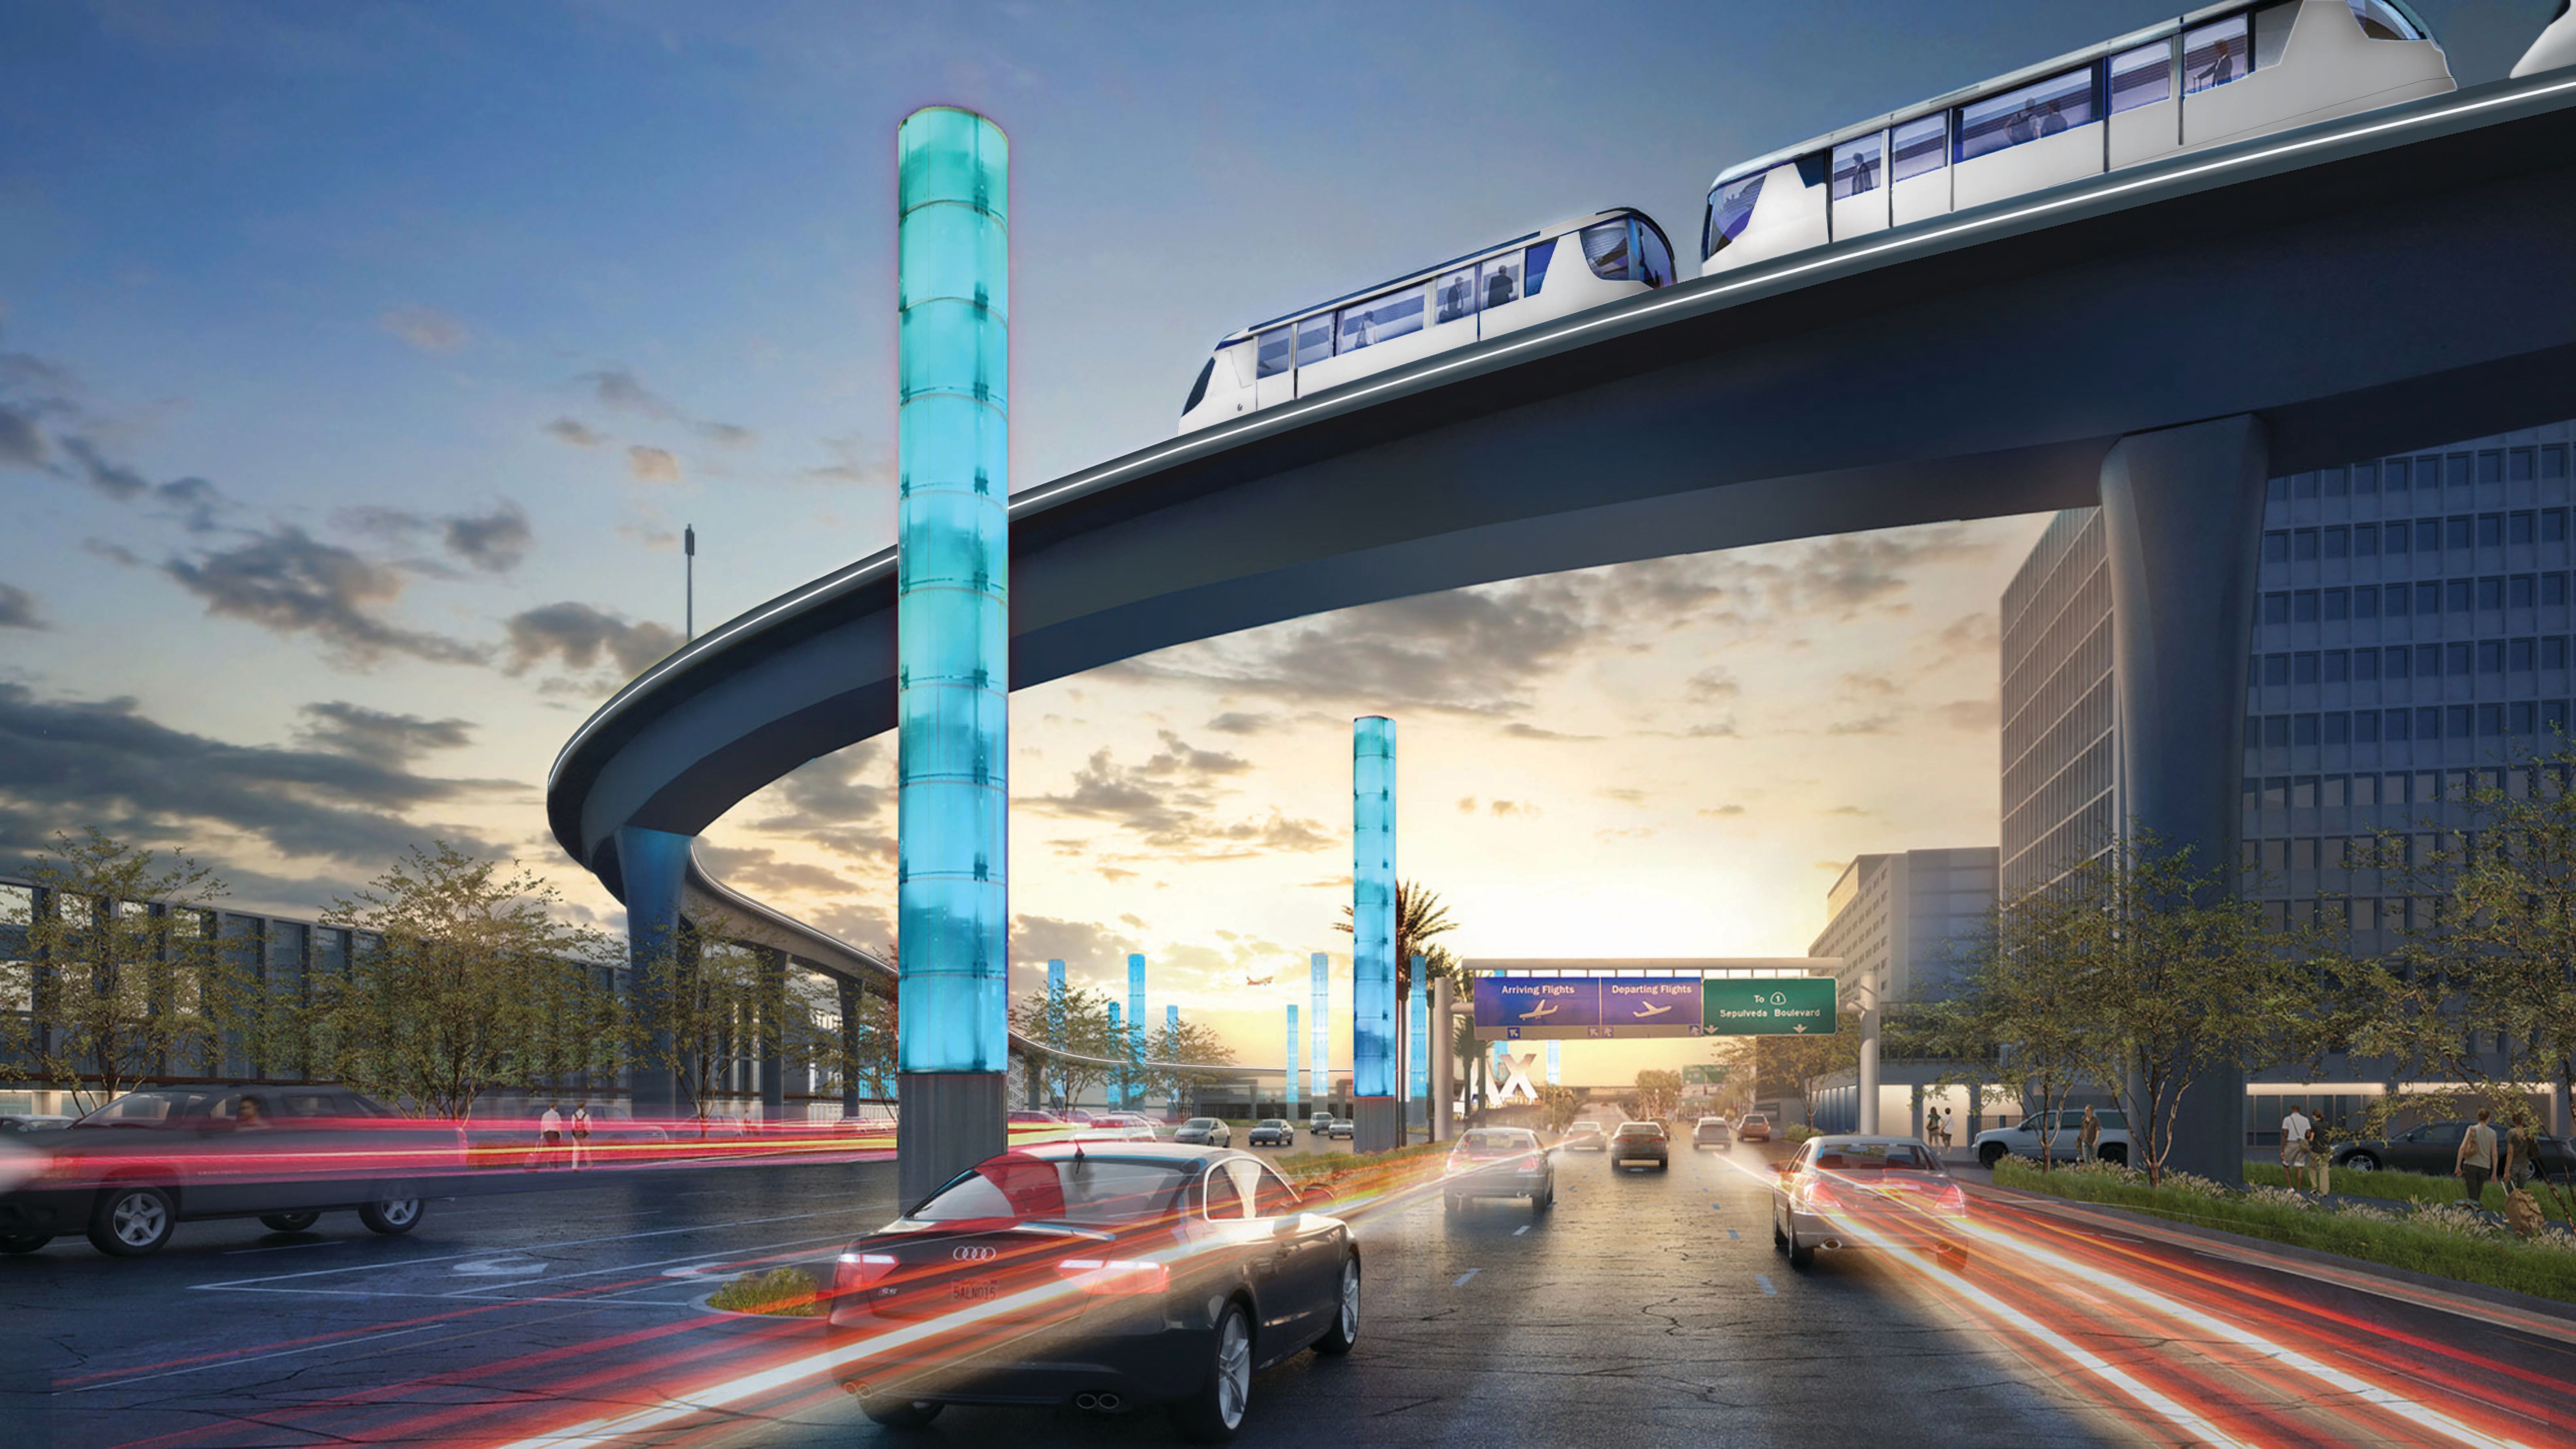 LAX People Mover gets $200 million more to resolve claims between contractor and airport